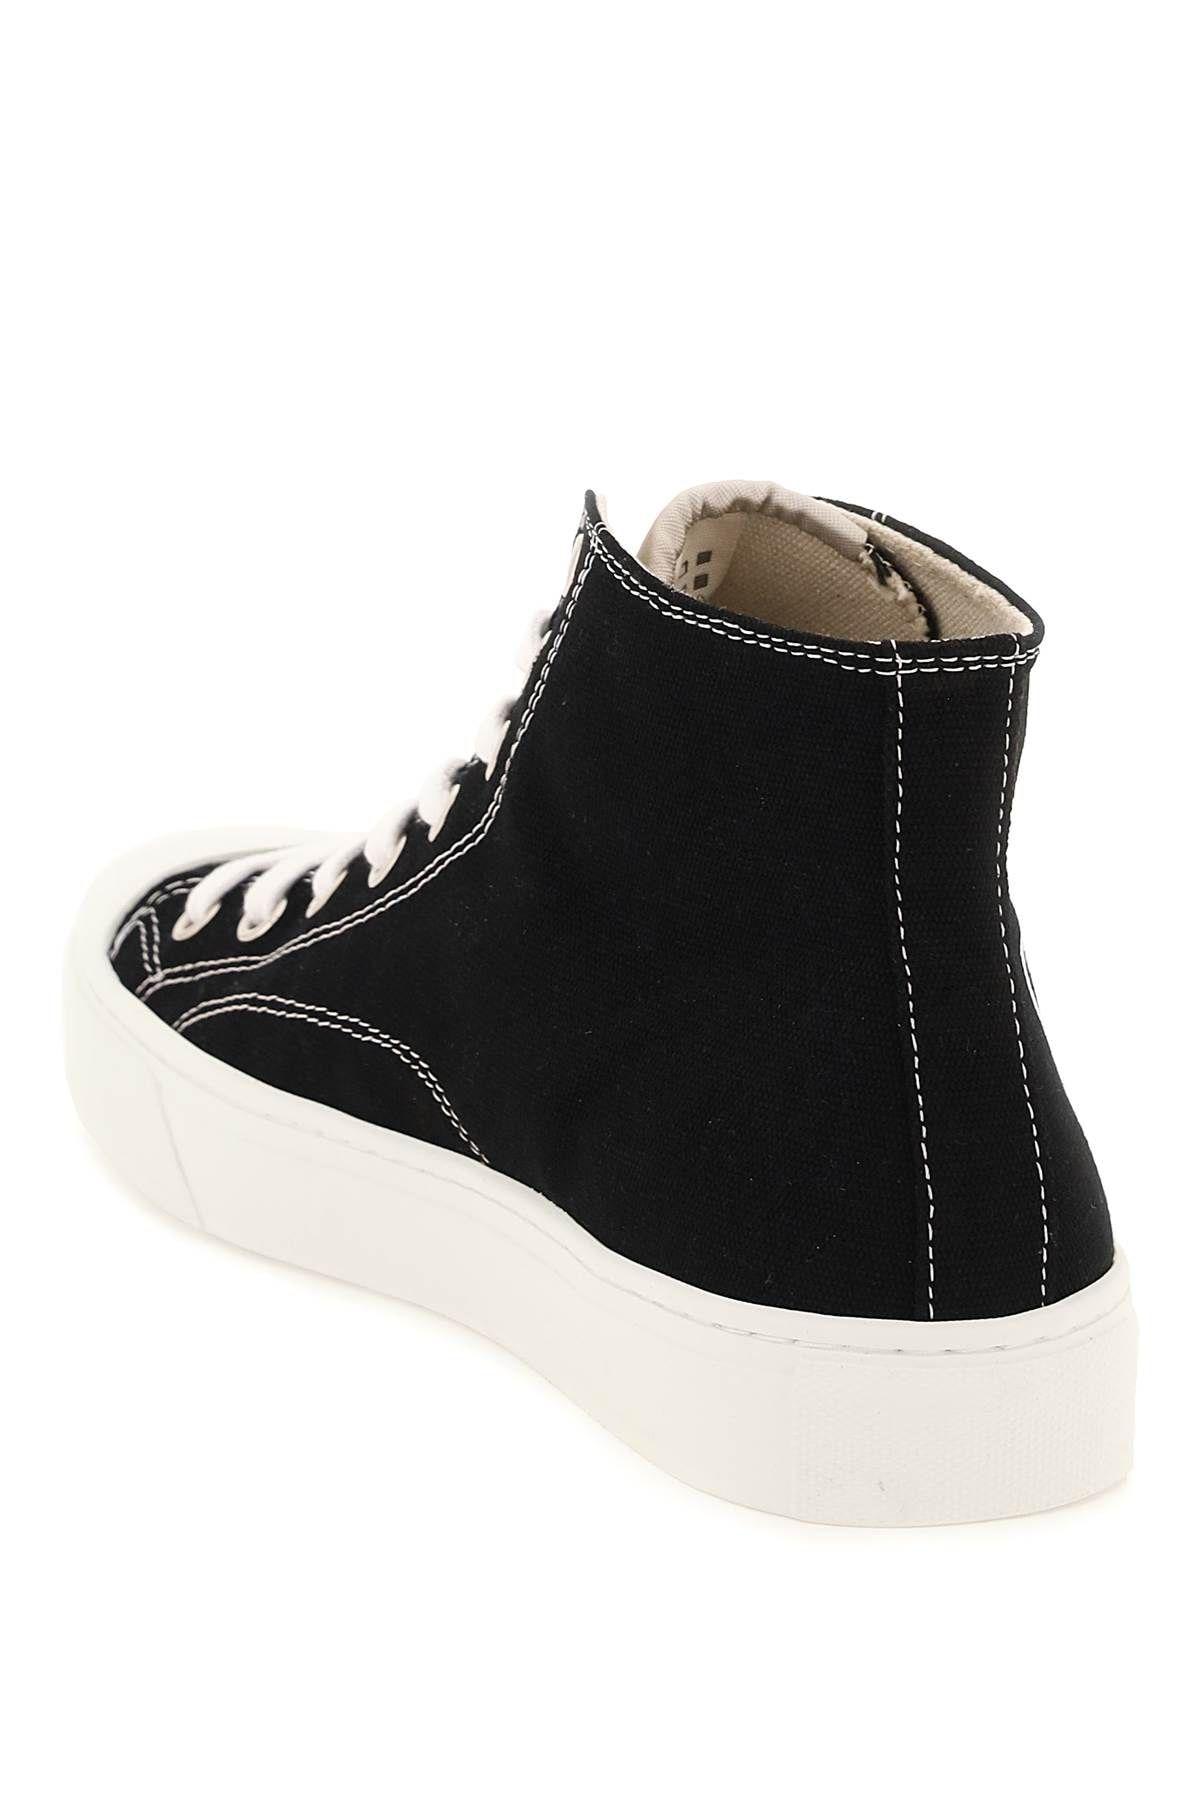 Vivienne Westwood Plimsoll High Top Canvas Trainers In Nero